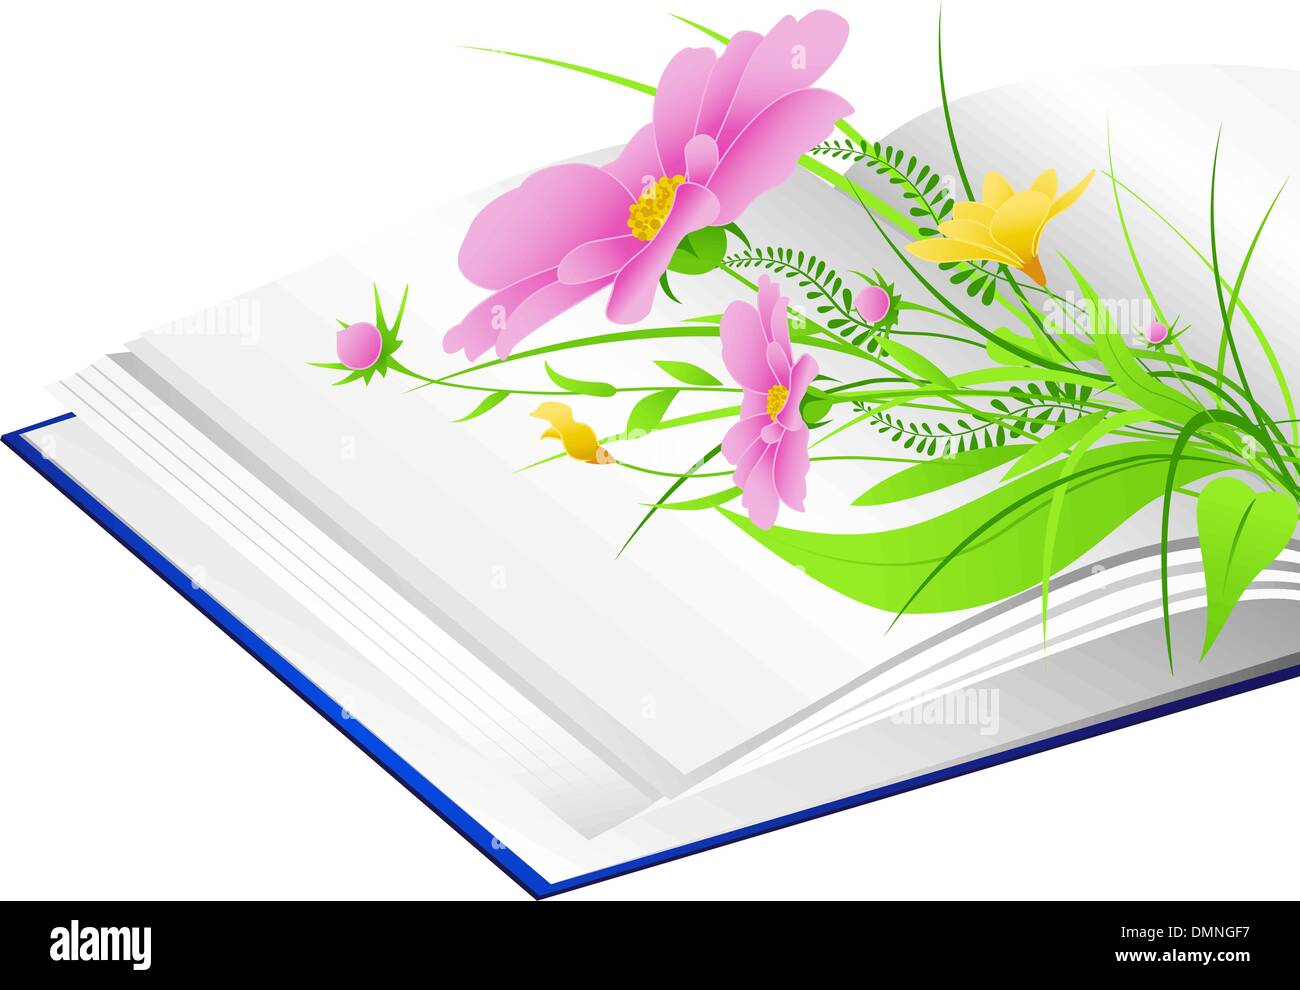 open book with flowers and green grass Stock Vector